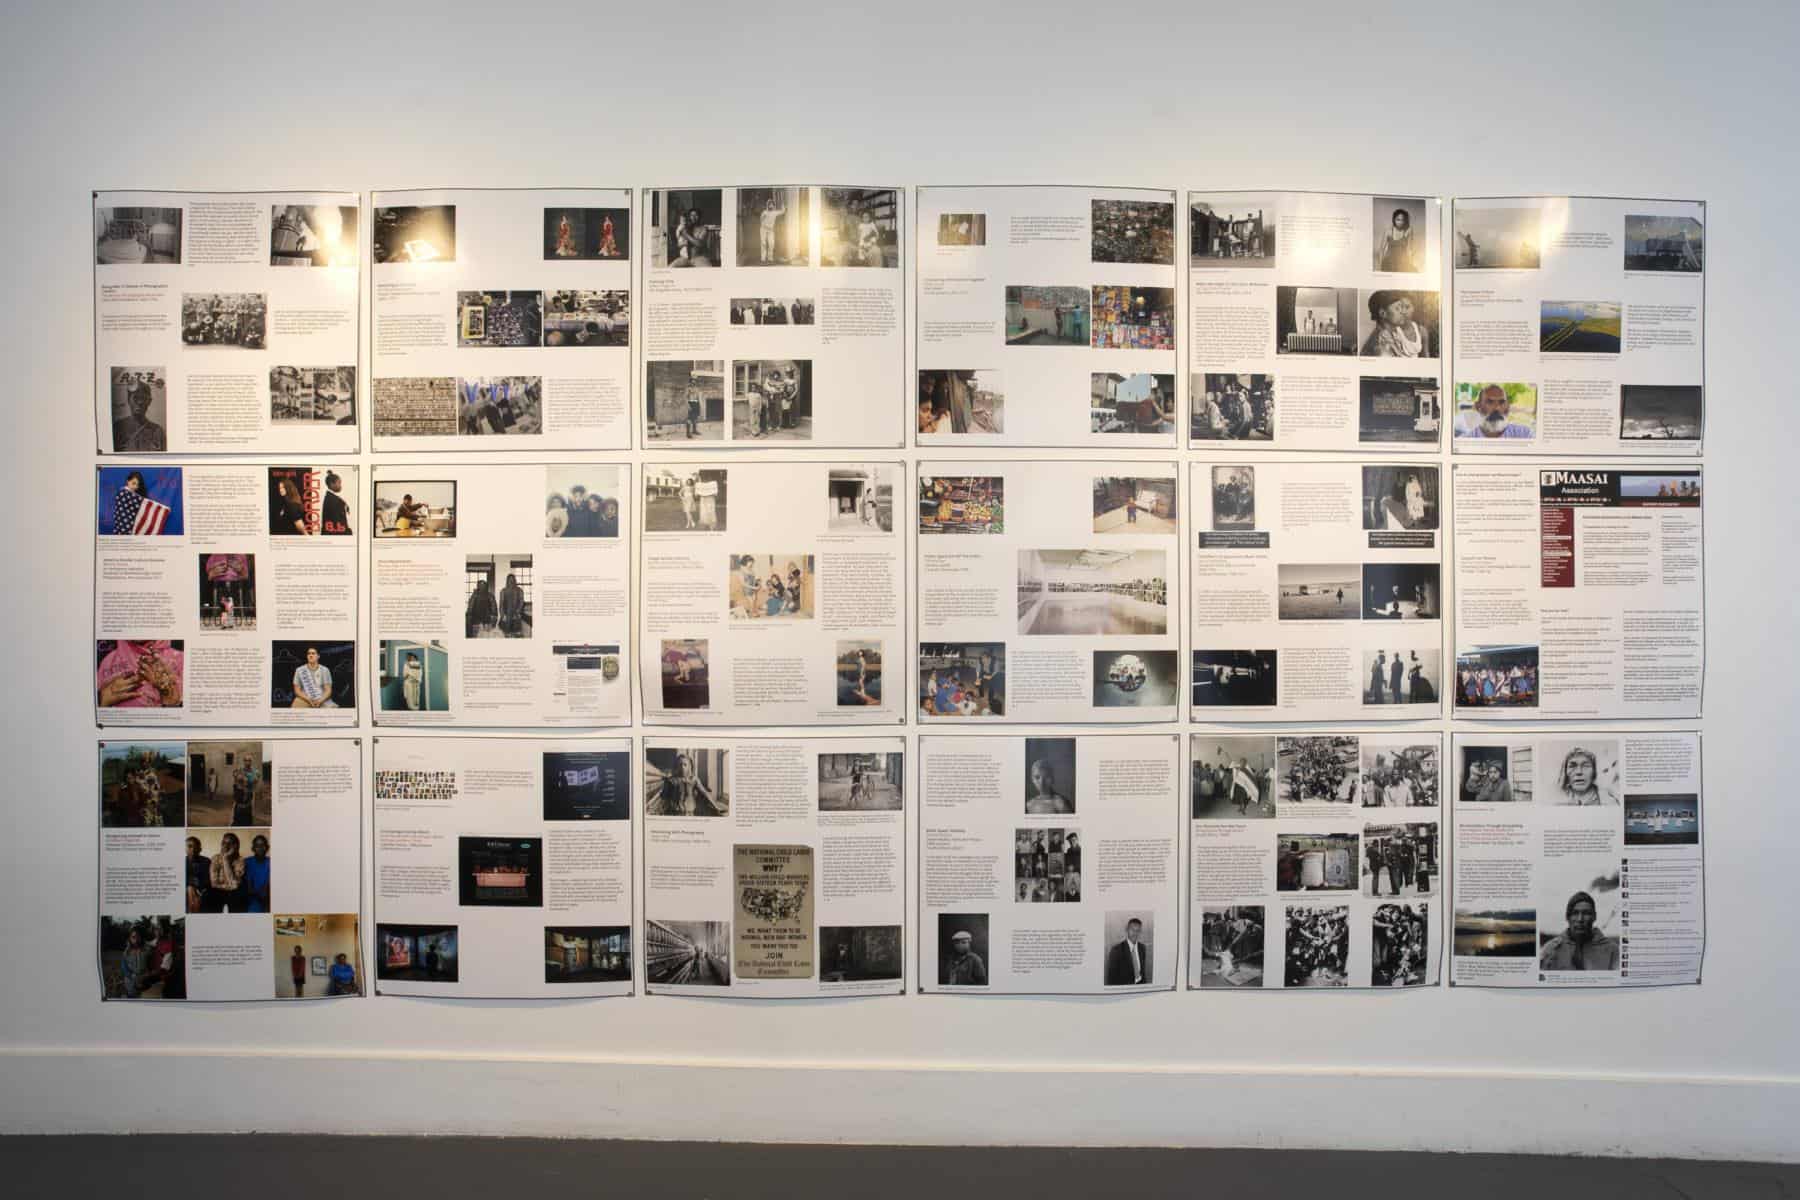 installation view "Collaboration: A Potential History of Photography", 2019. Photo credit Jessica Smolinski.